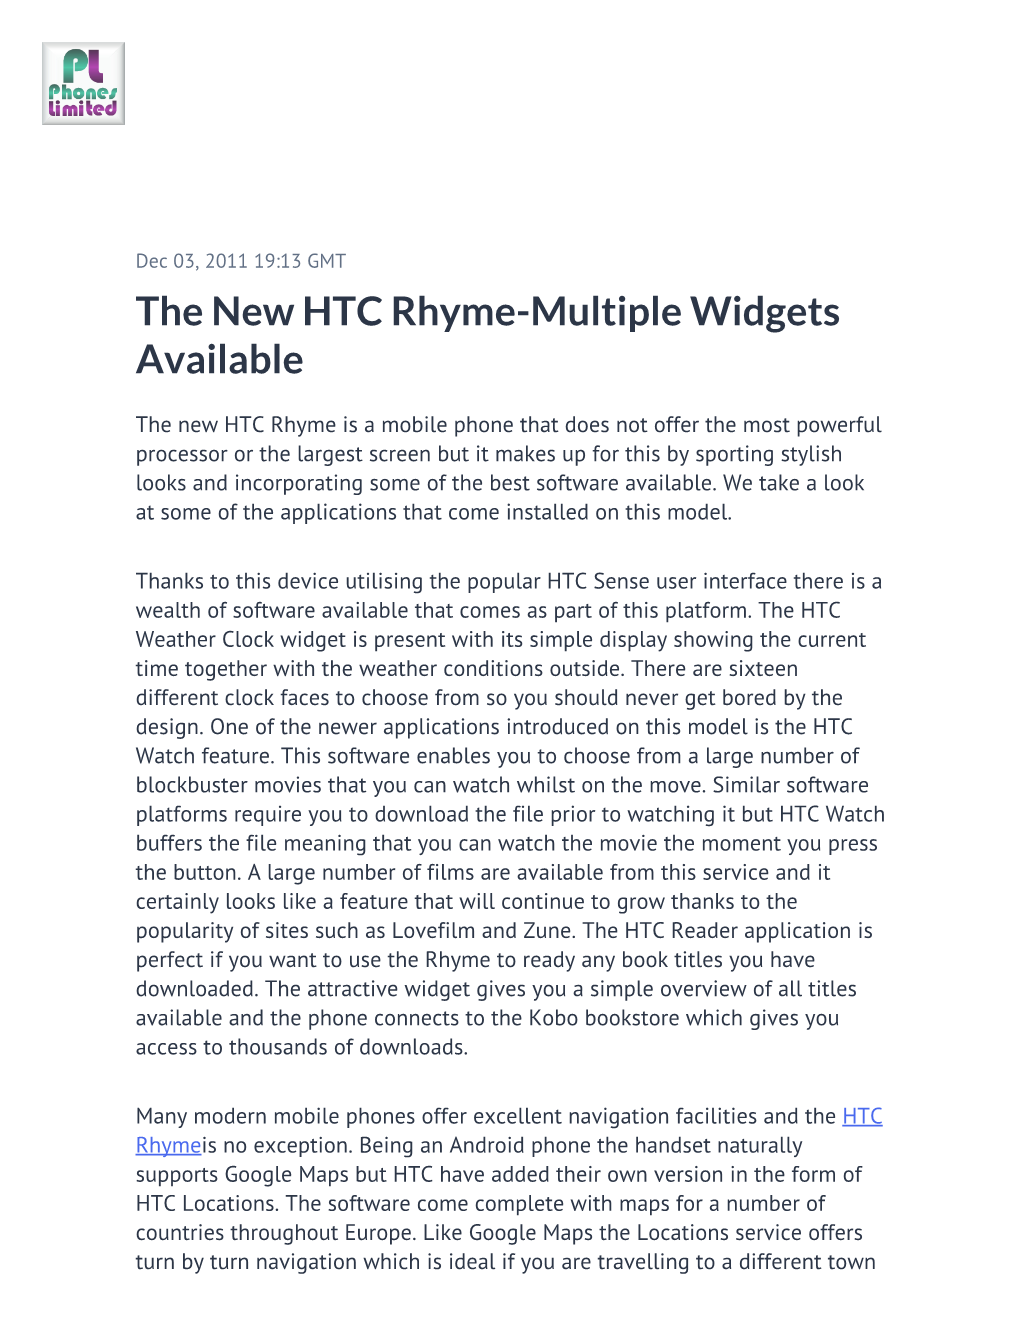 The New HTC Rhyme-Multiple Widgets Available